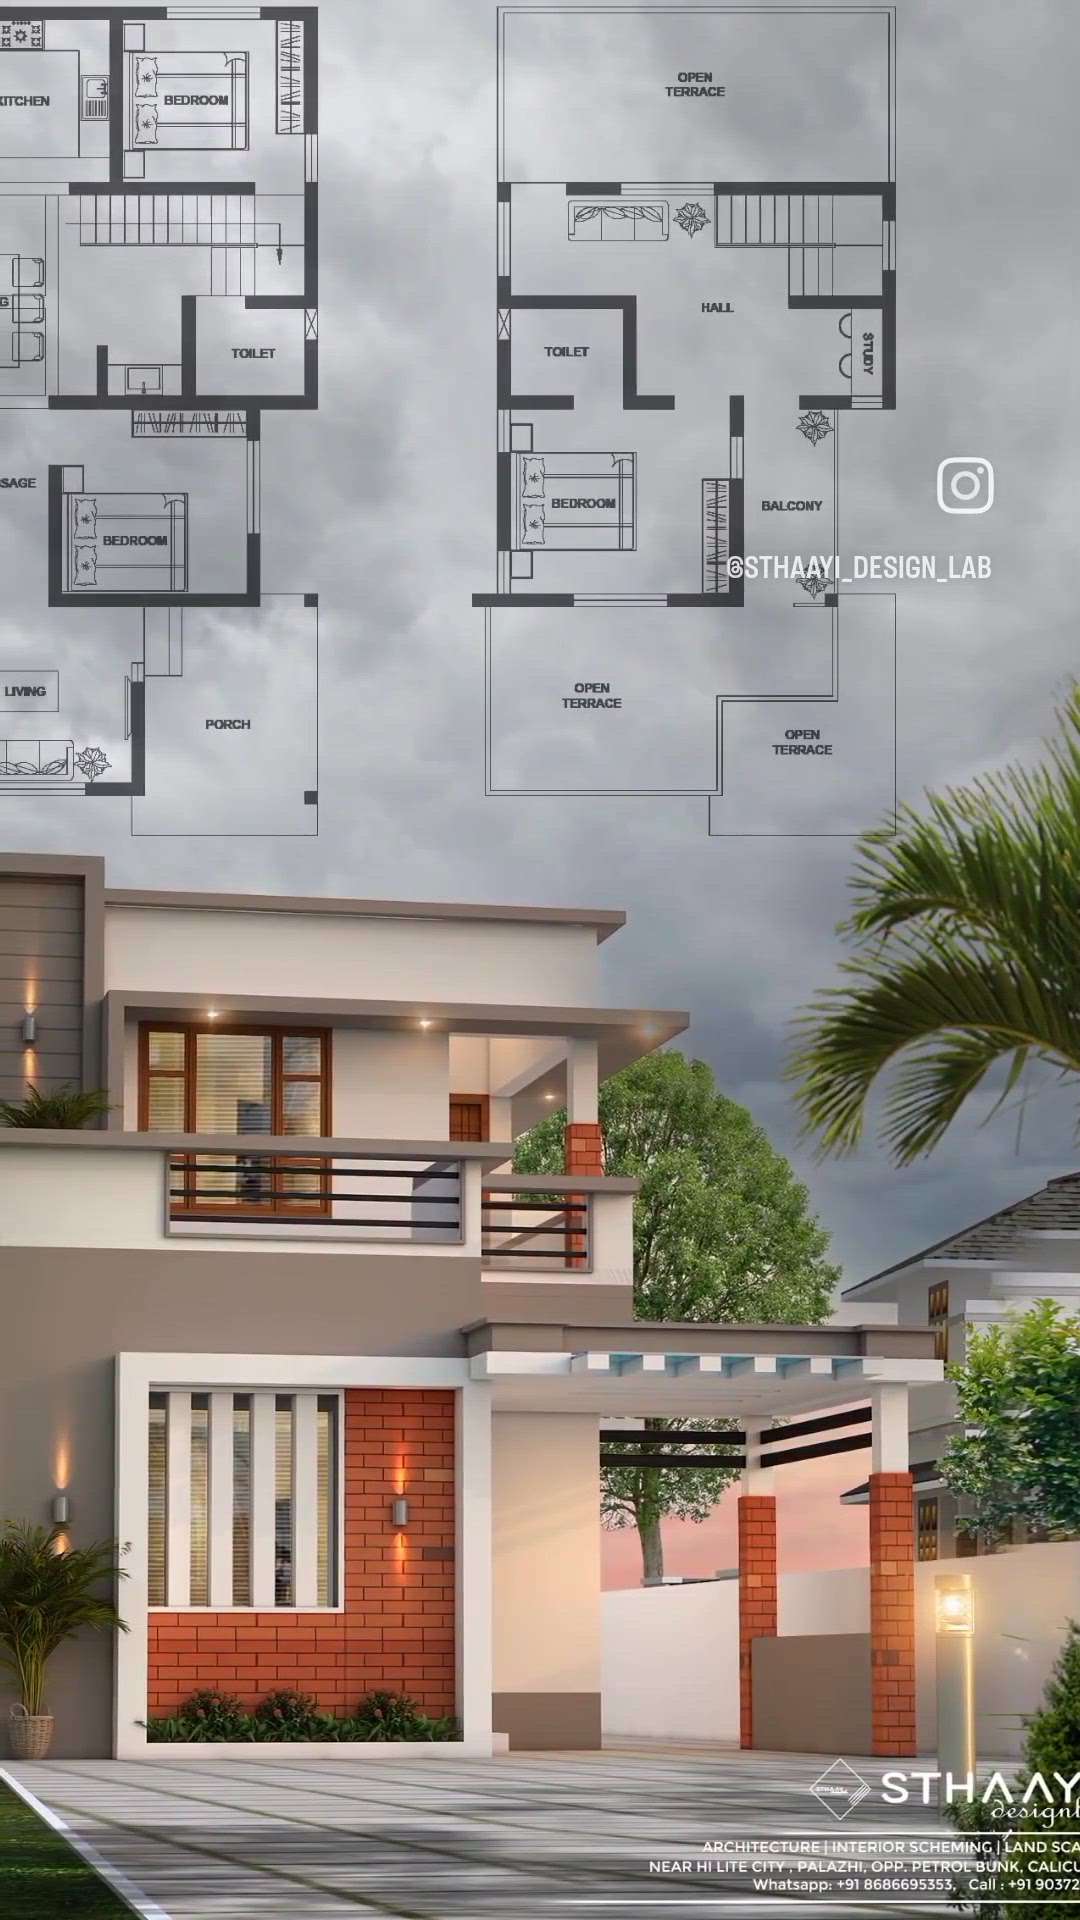 Budget Home Plan 🏡 3BHK 
Area : GF - 853 sq.ft
Area : FF -  428 sq.ft
Total : 1281 sq.ft

Ground Floor 
● Porch
● Living 
● Passage
● Dining 
● 2 Bedroom
● 1C-toilet Indoor 
● Kitchen 

First Floor 
● 1Bedroom Attached
● Hall 
● Study space 
● Balcony 

.
.
.
#sthaayi_design_lab
#sthaayi #homedecor #floorplan | #architecture | #architecturaldesign | #housedesign | #buildingdesign | #designhouse | #designerhouse | #interiordesign | #construction | #newconstruction | #civilengineering | #realestate #kerala #budgethome #keralahomes